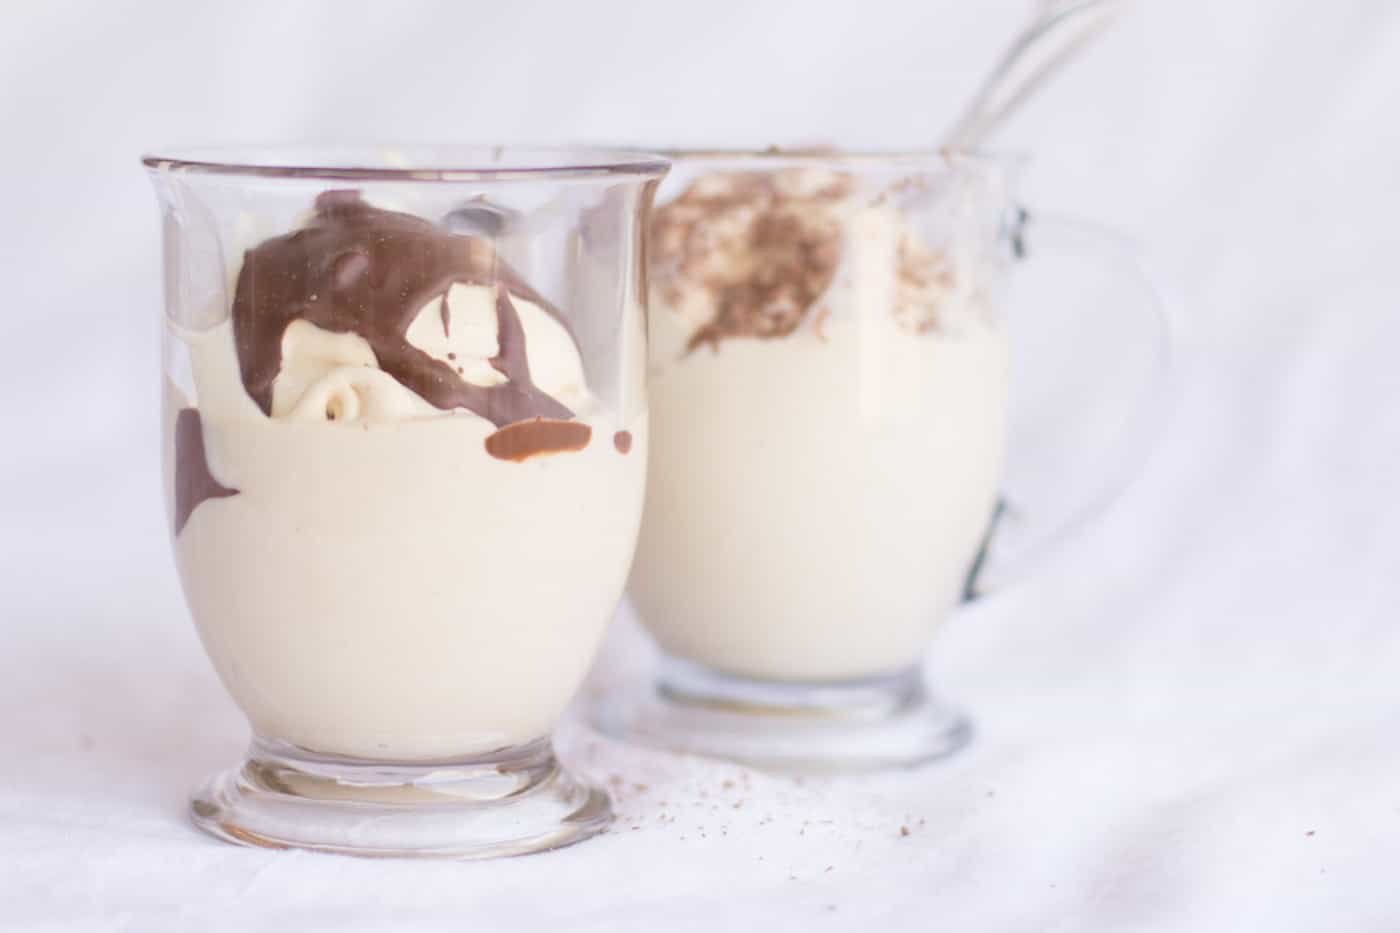 This Bailey's ice cream recipe is a delicious combination of flavors. You'll definitely want to add chocolate sauce to the top of this boozy treat!